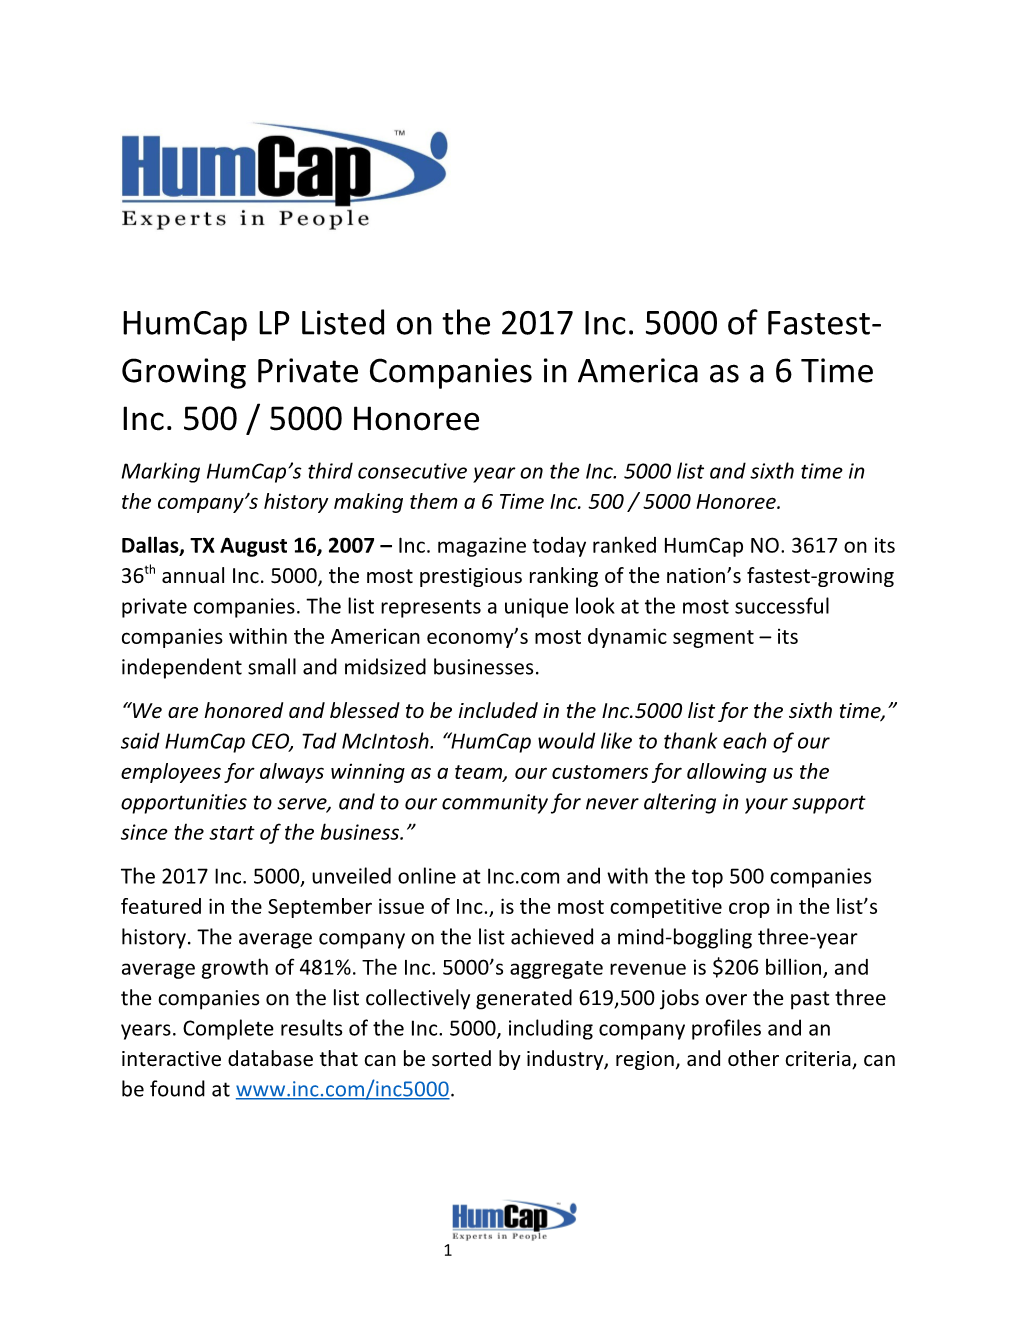 Humcap LP Listed on the 2017 Inc. 5000 of Fastest-Growing Private Companies in America